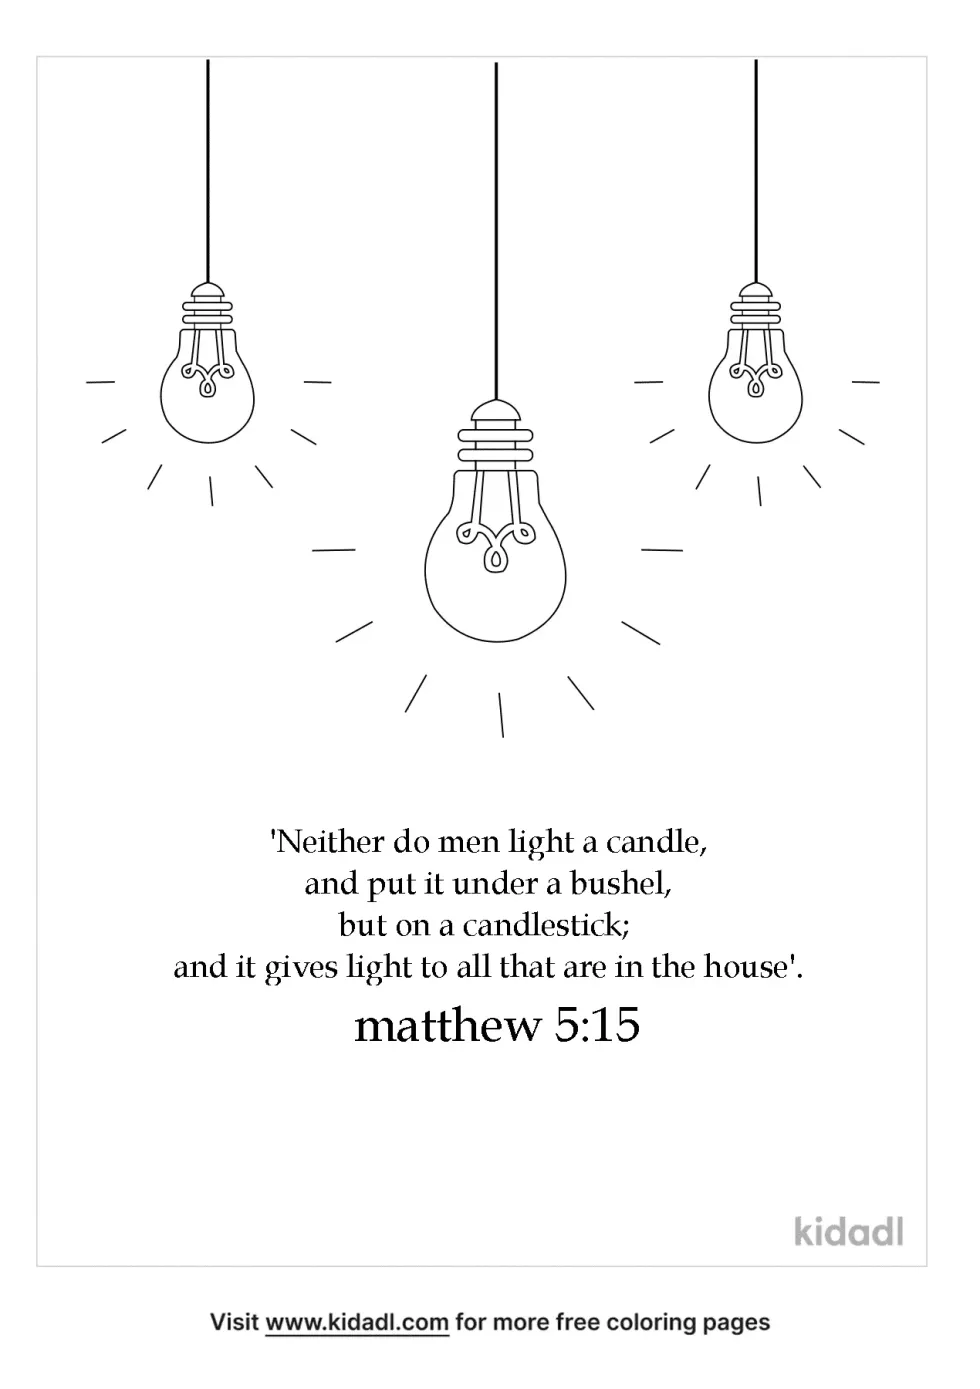 Matthew 5:15 Coloring Page